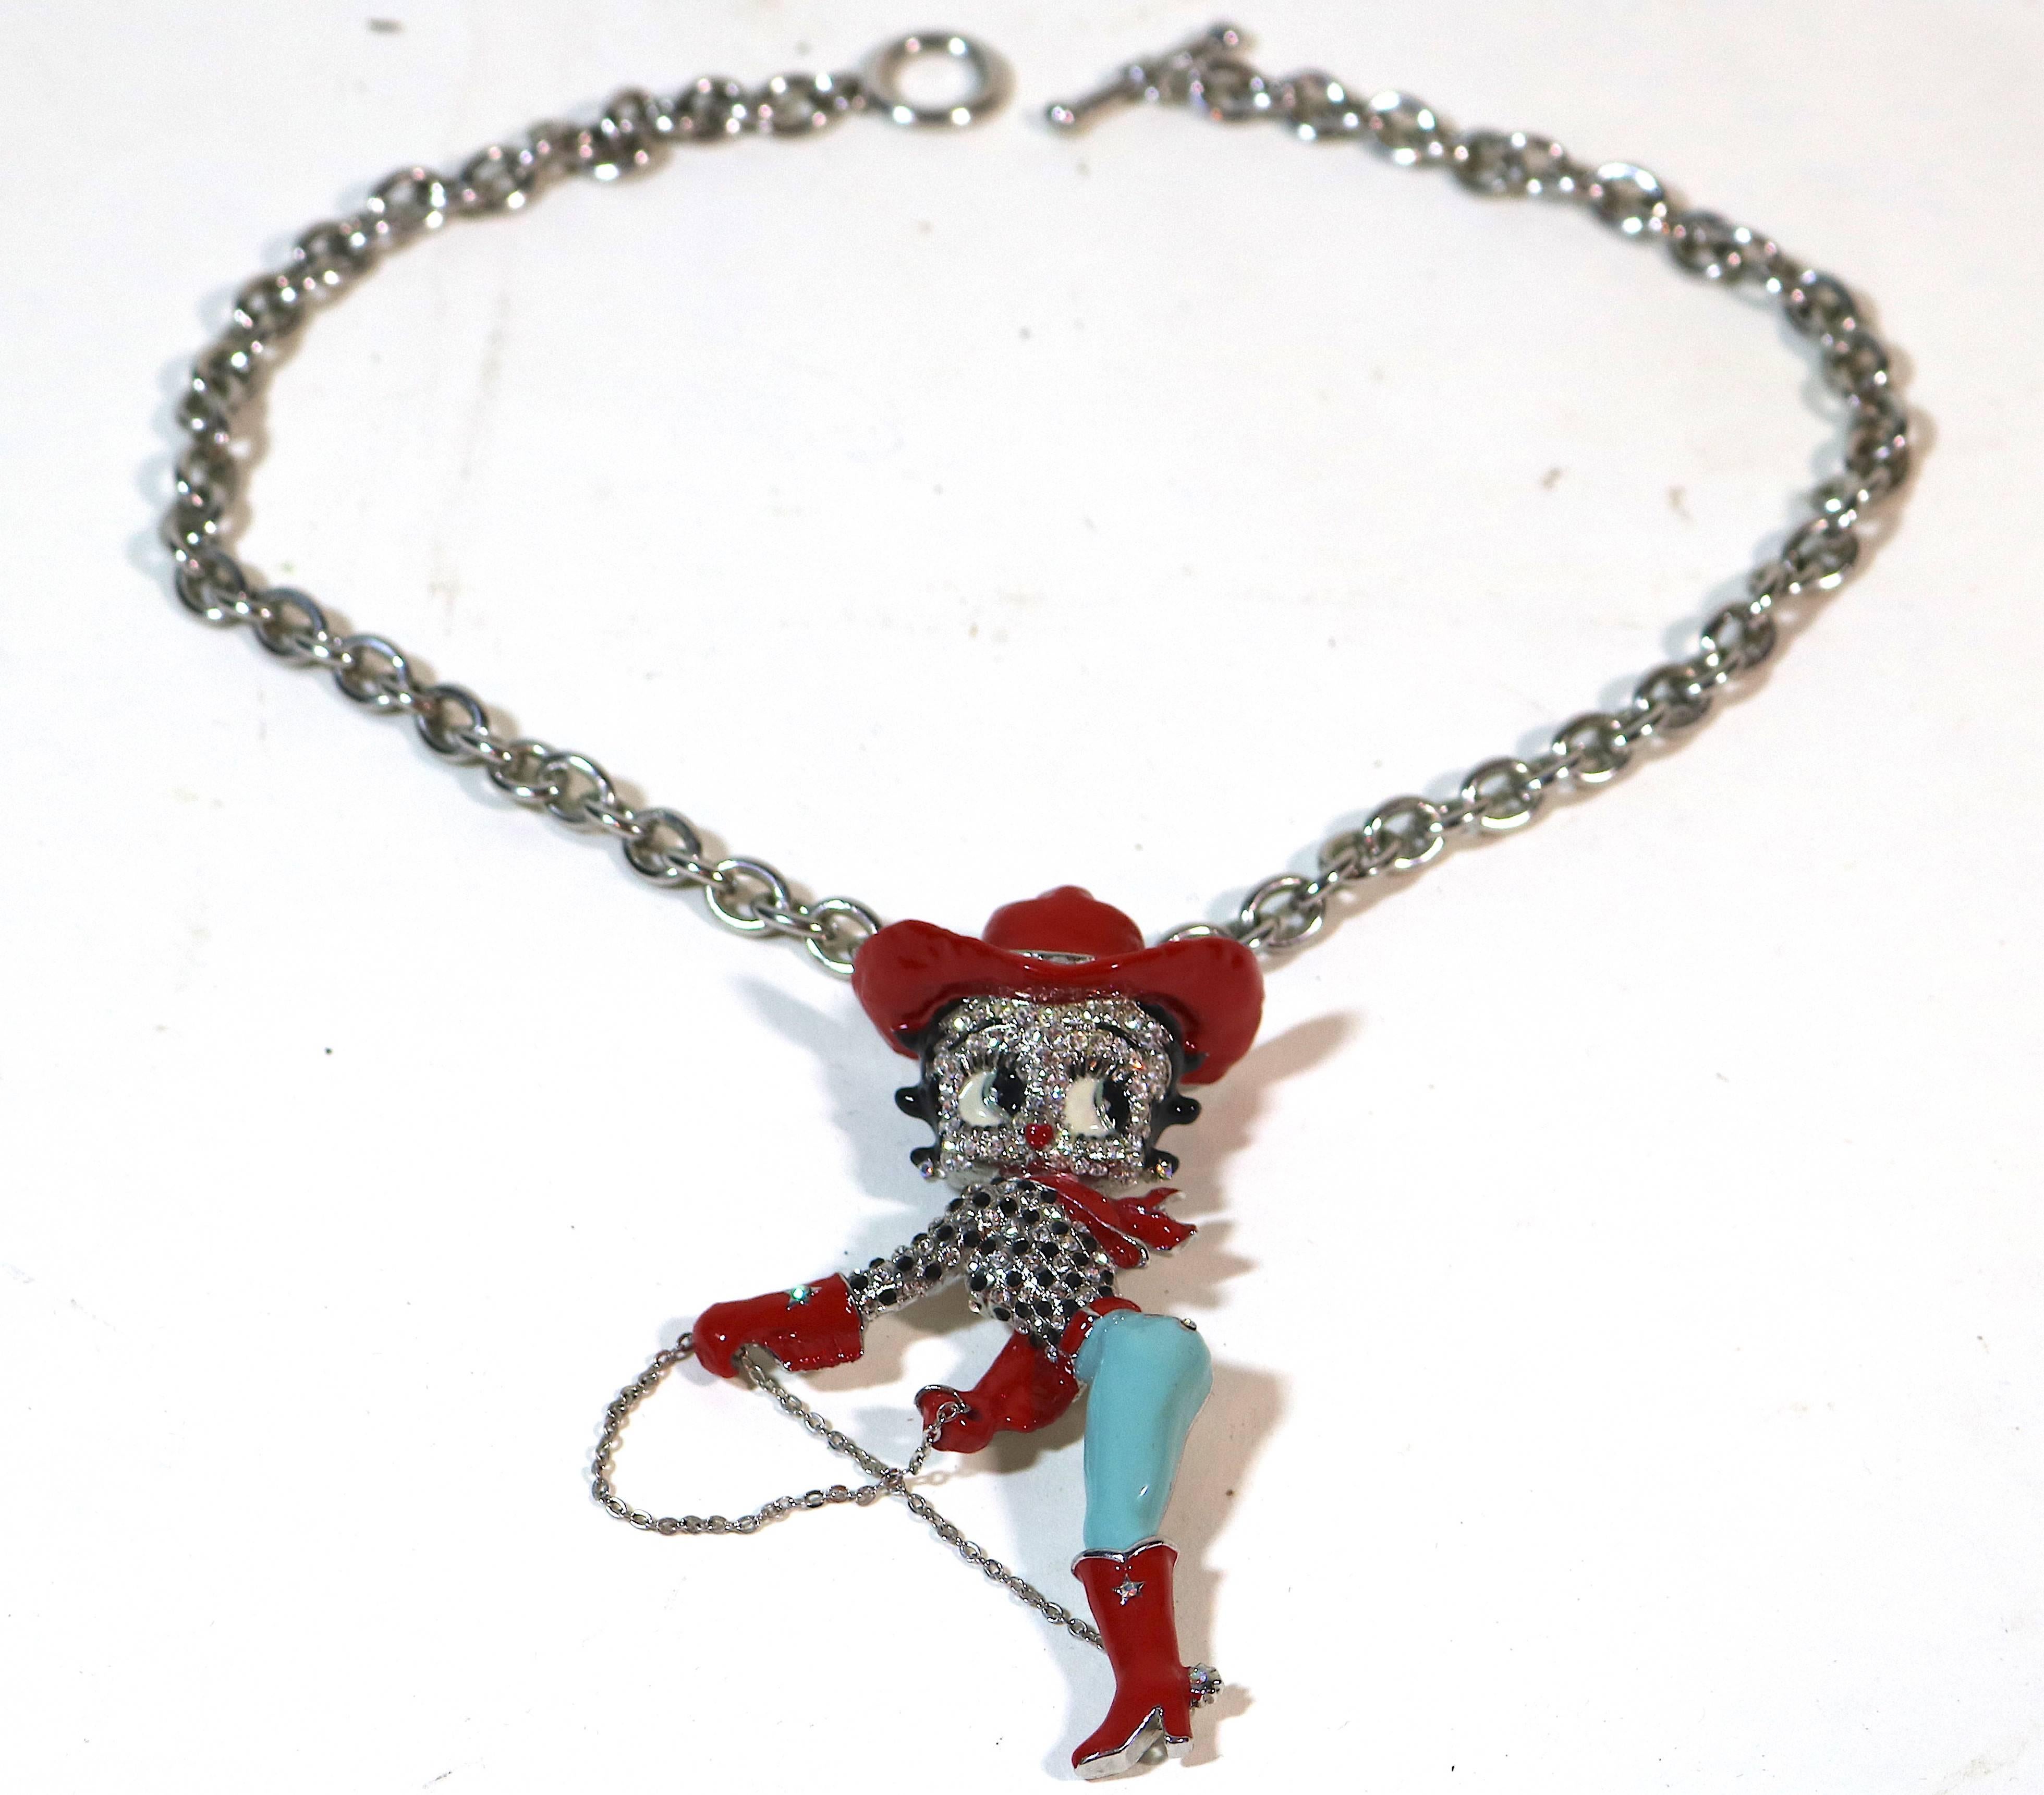 Most adorable unique cowgirl Betty Boop with Lasso, dressed in her best cowgirl outfit sterling silver with colorful enamel with pave cz's and a special cz stone on her 'Bottom' --marked 925 en verso. on a silver linked chain.
looks like never been